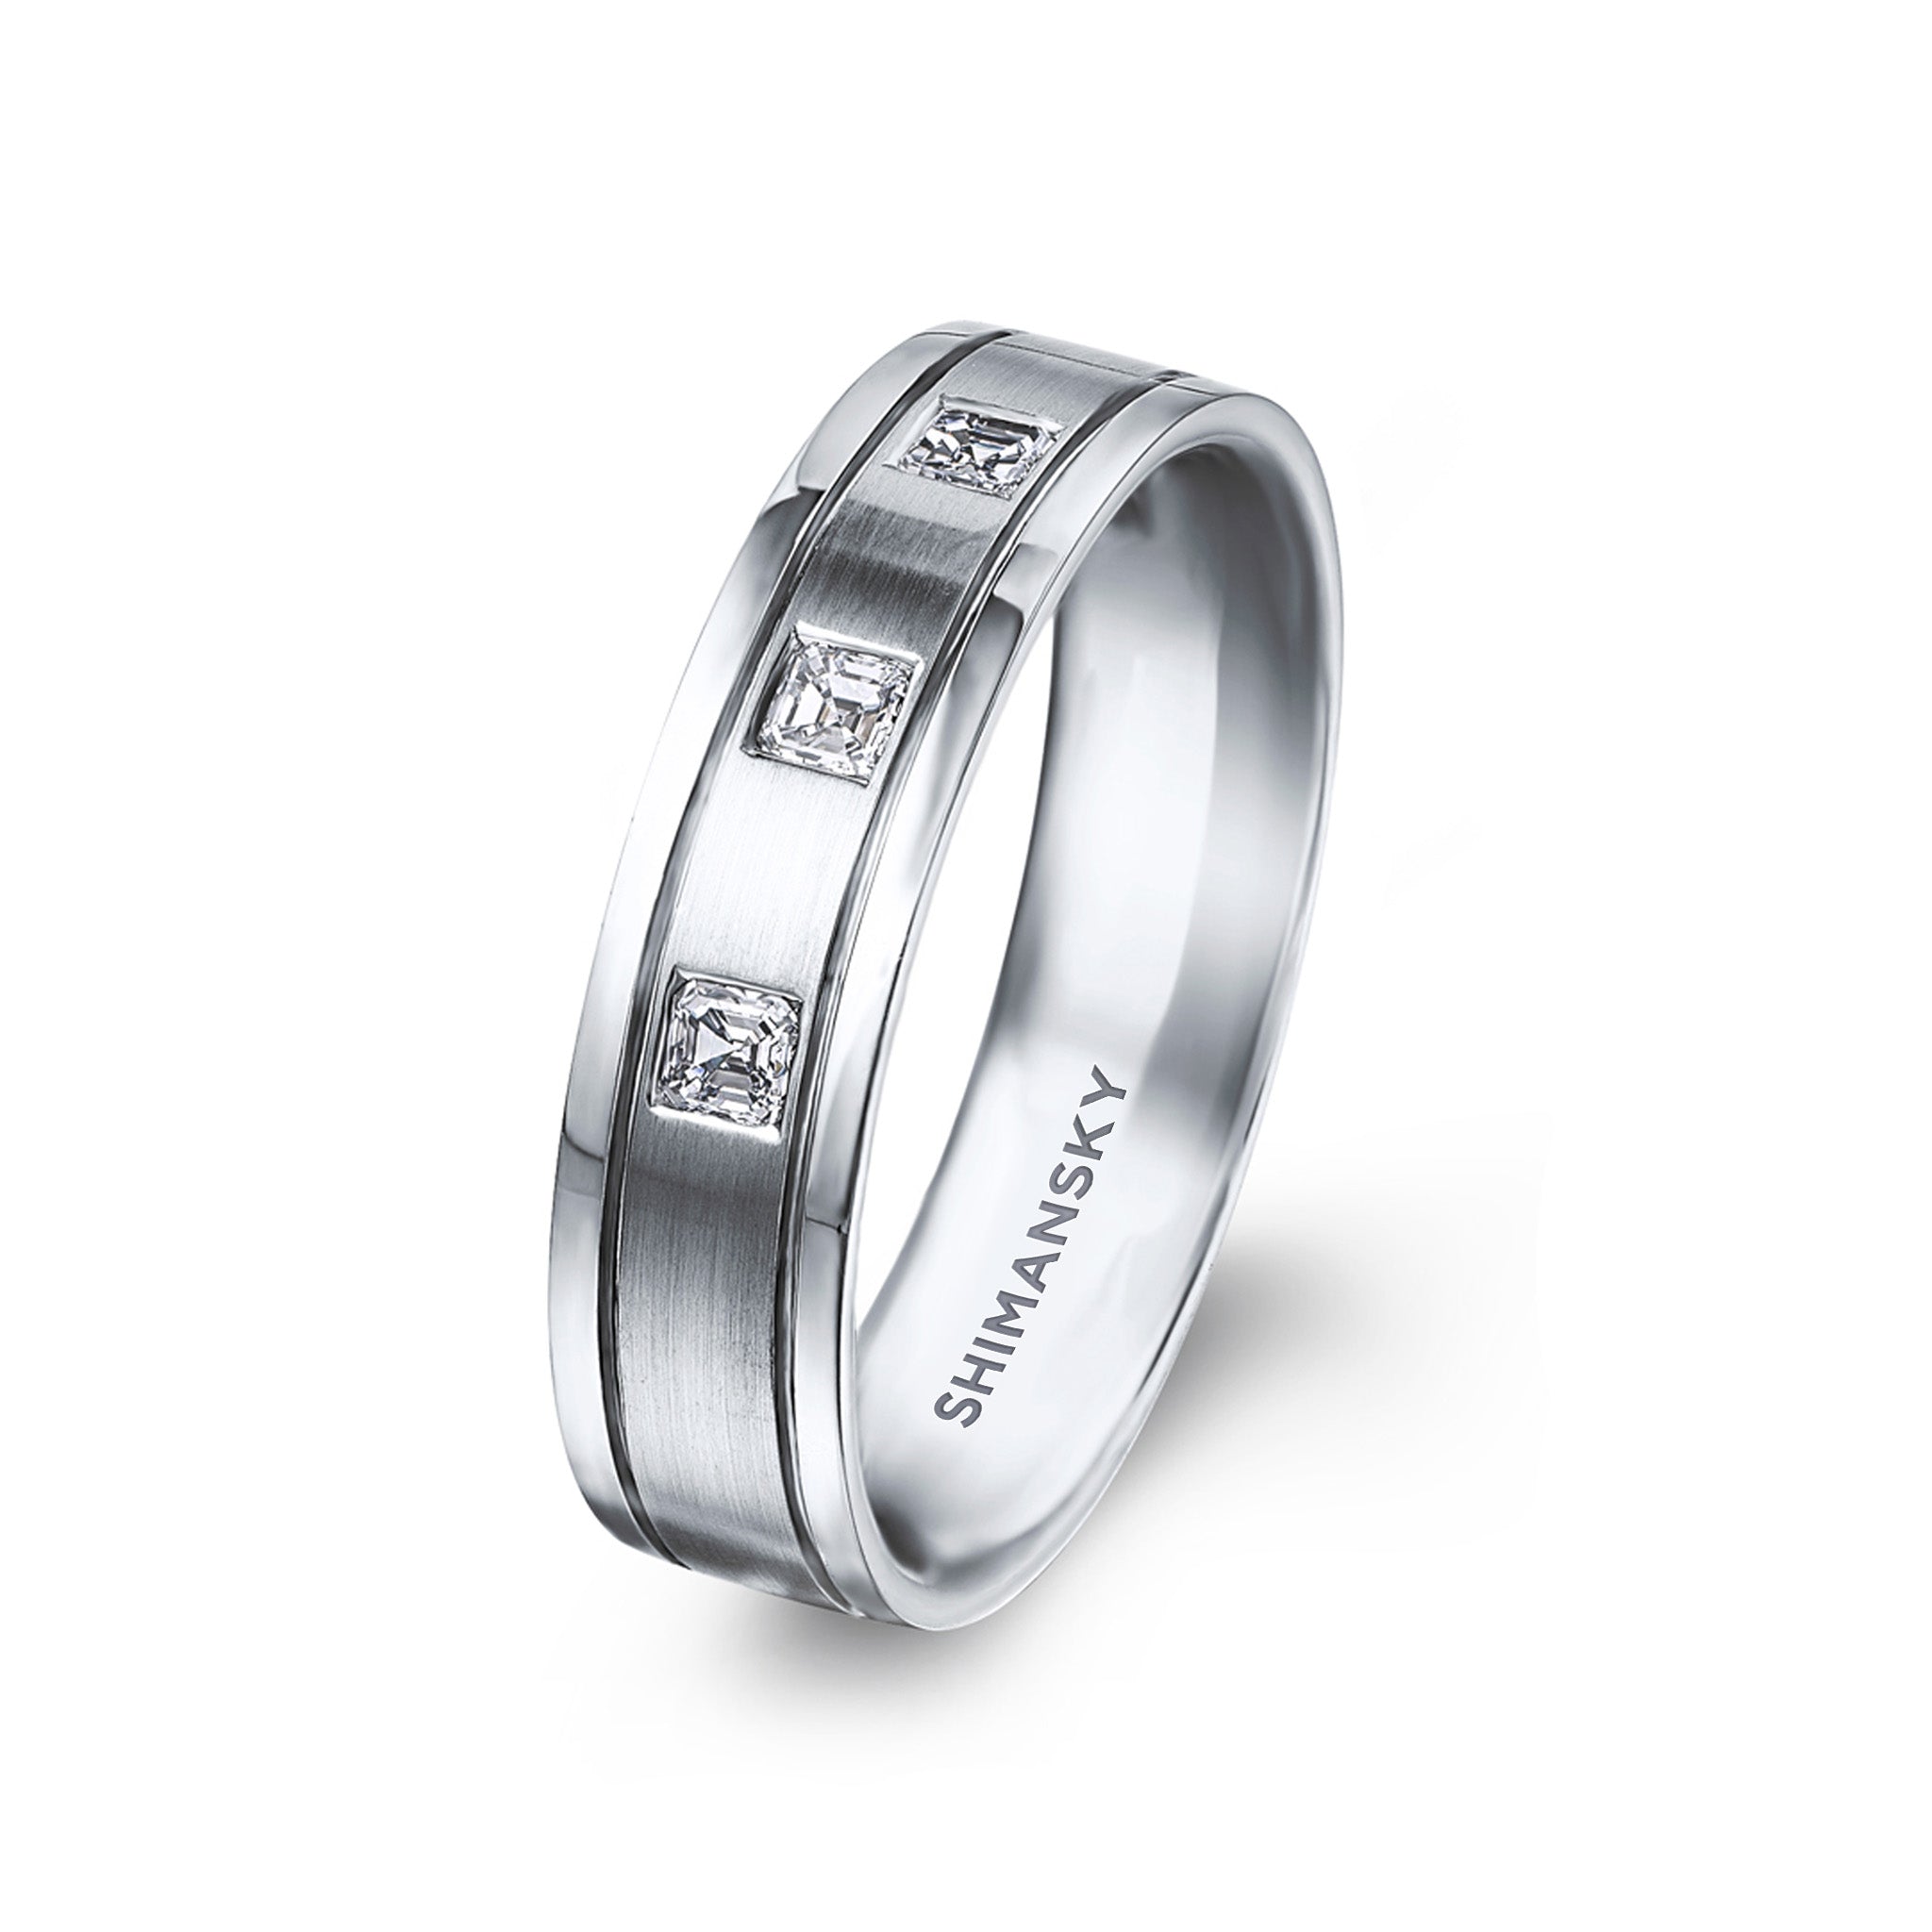 Shimansky - Max-Line Square Diamond Grooved Wedding Band in Brushed Palladium